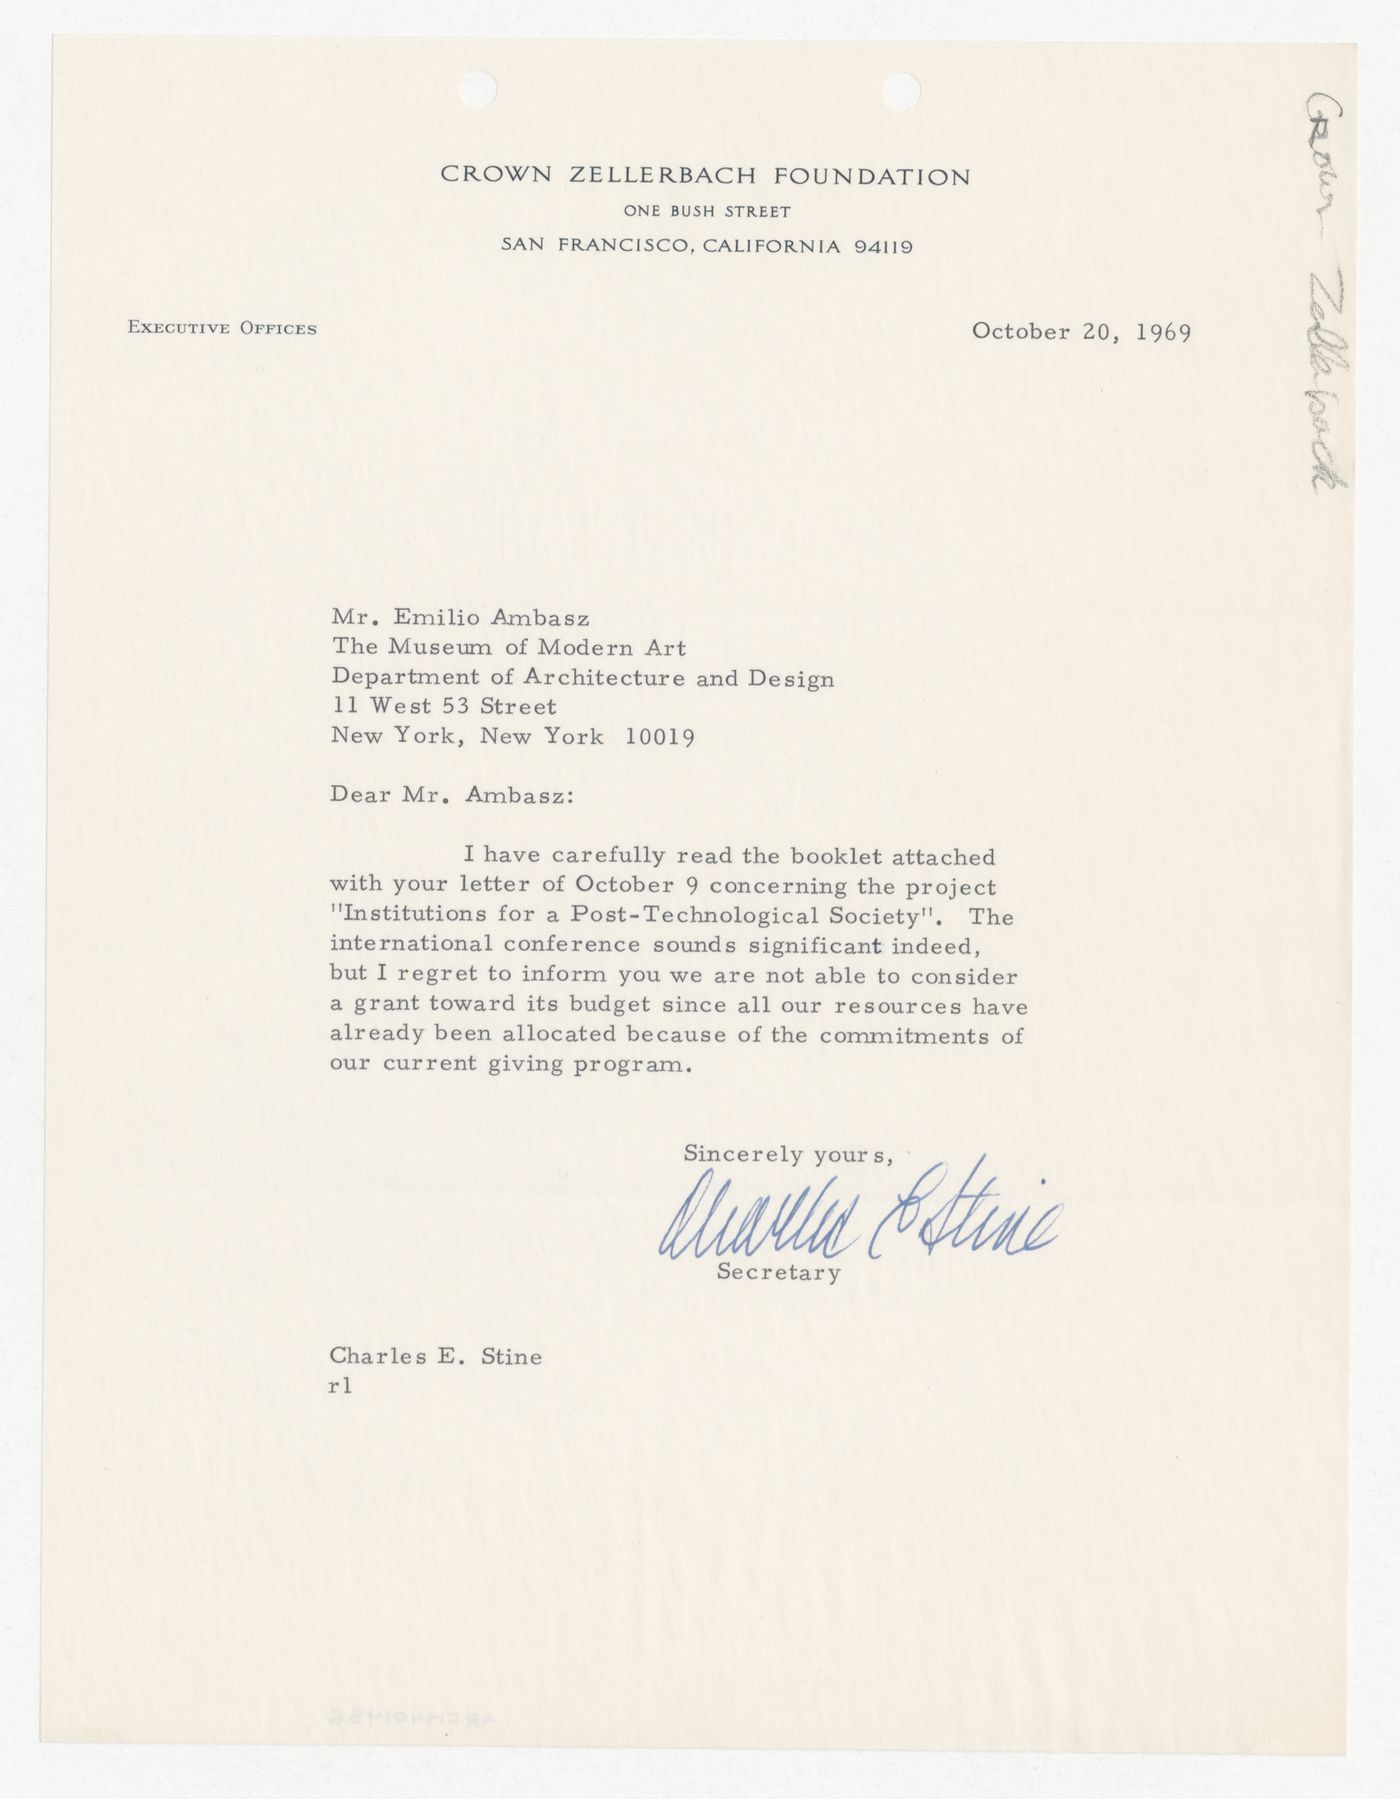 Letter from Charles E. Stine to Emilio Ambasz responding to proposal for Institutions for a Post-Technological Society conference